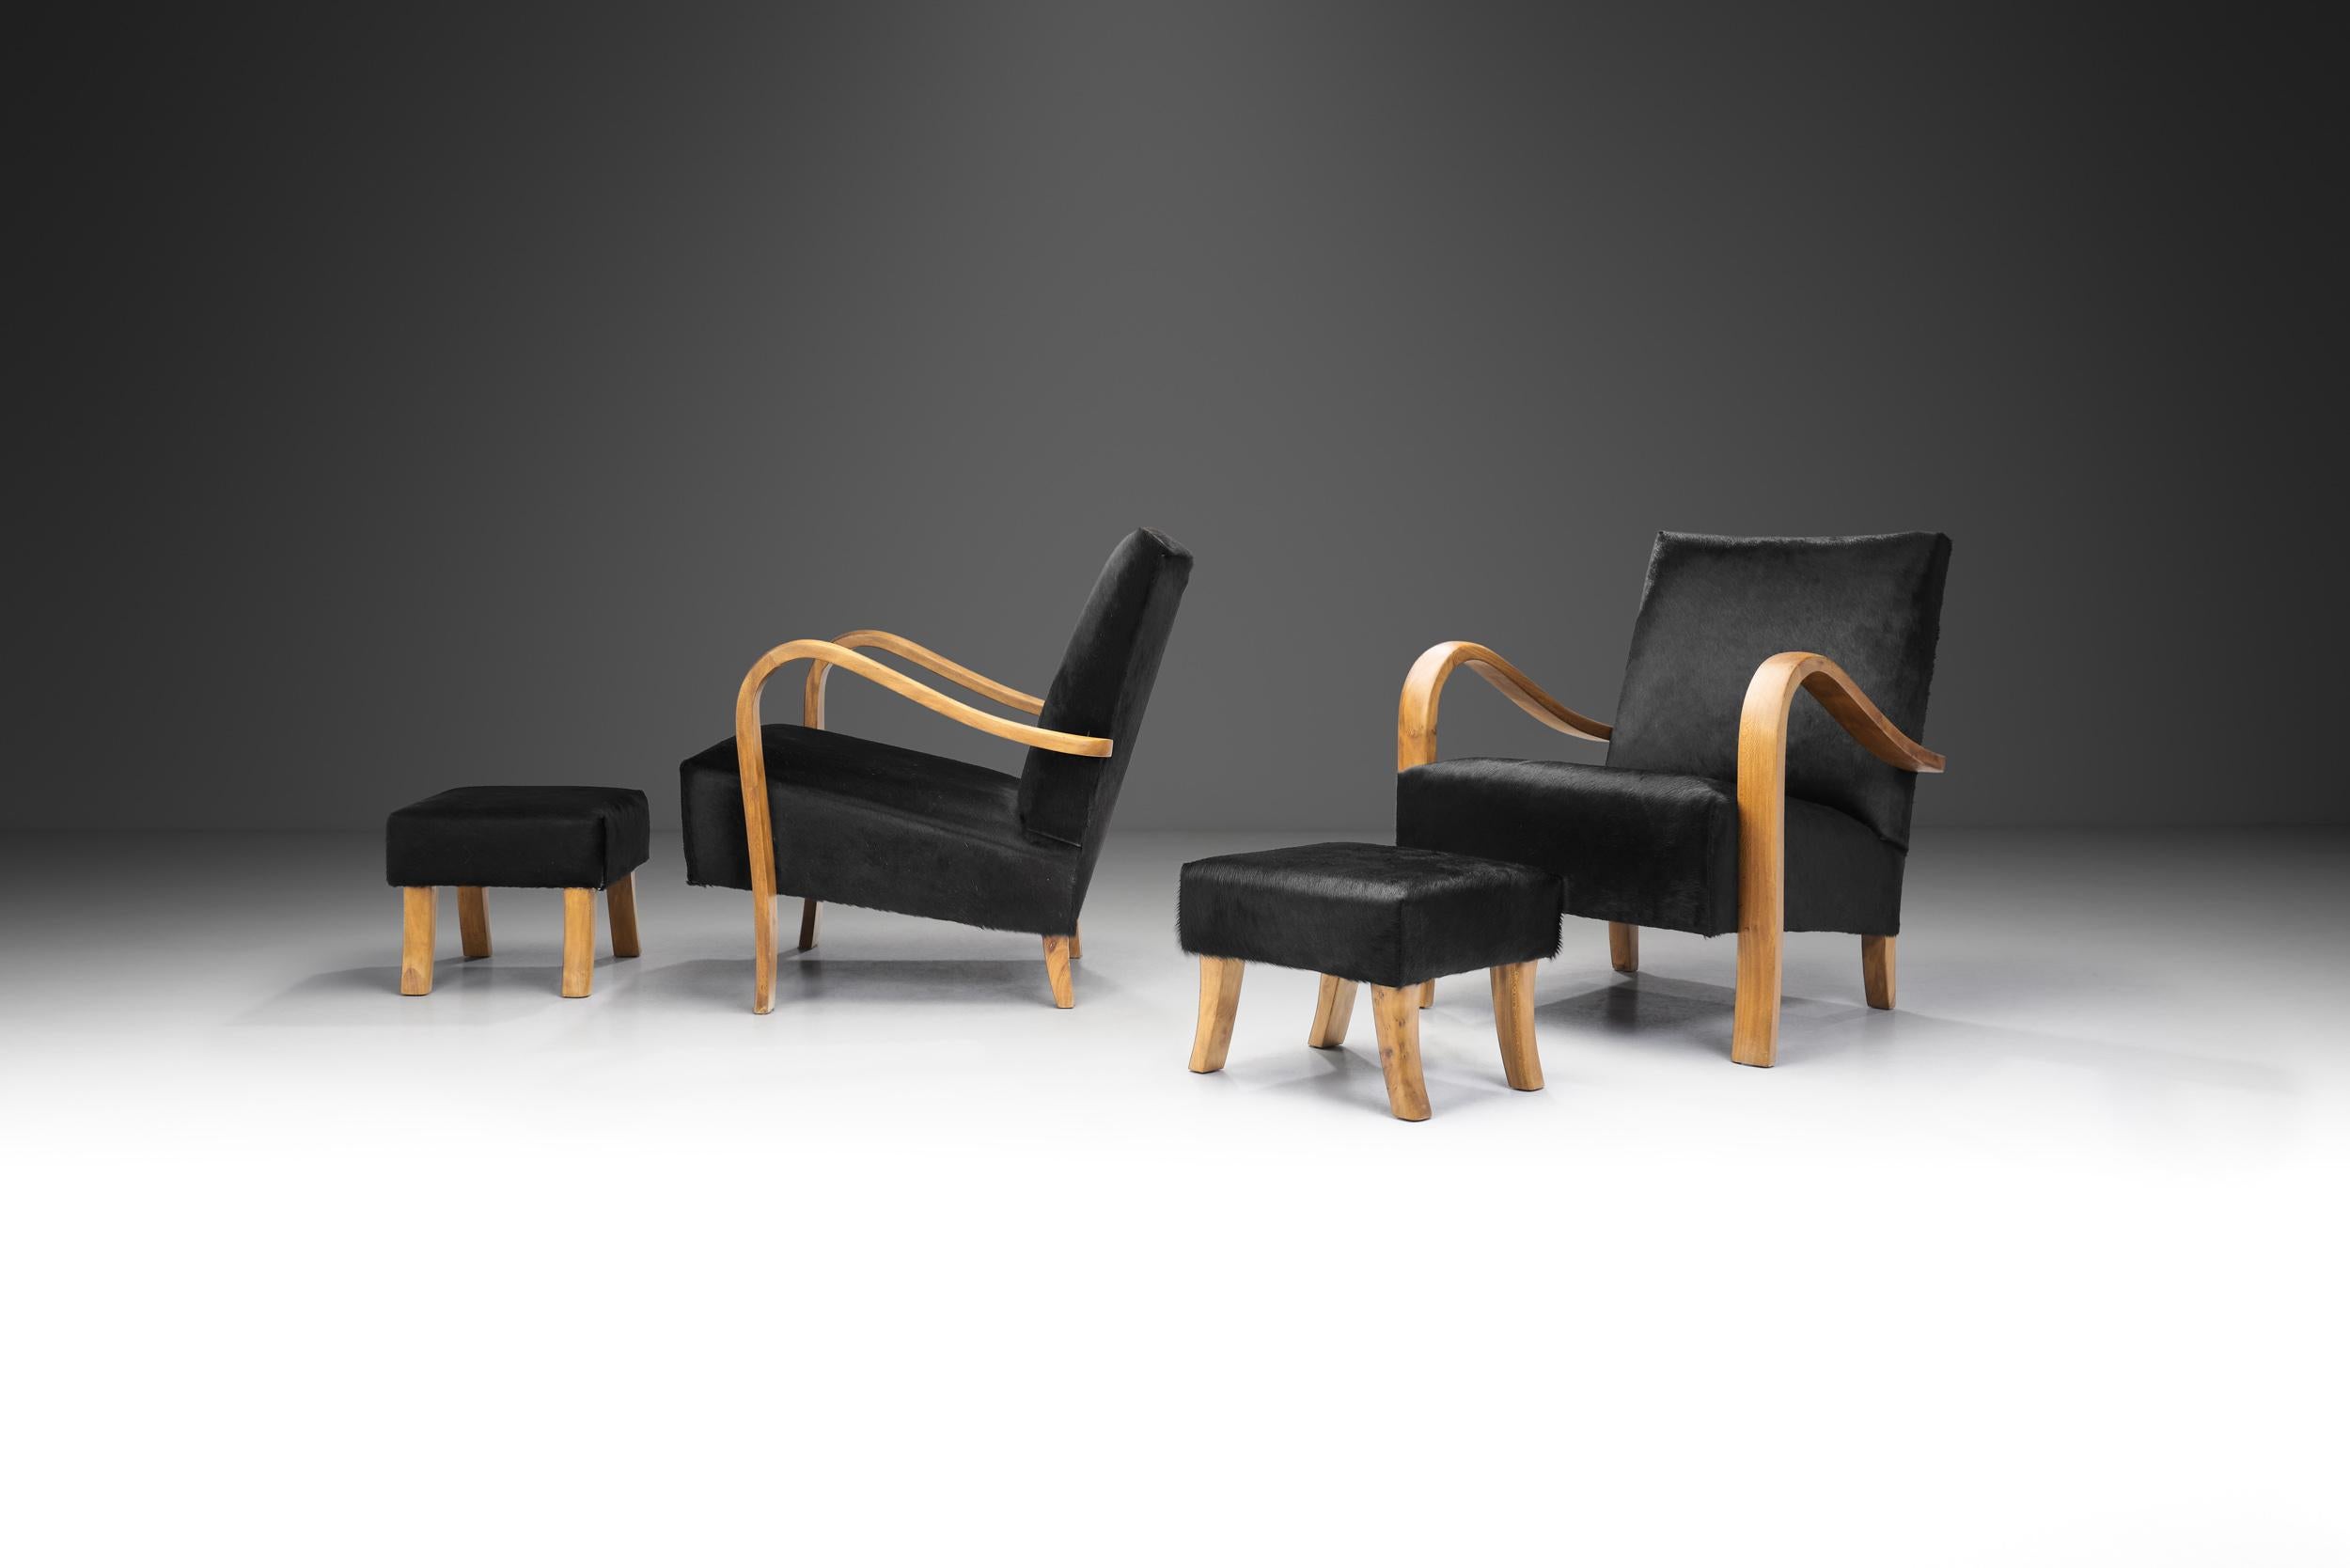 Mid-20th Century Italian Cherry Wood Lounge Chairs with Foot Stools in Dark Cowhide, Italy 1950s For Sale